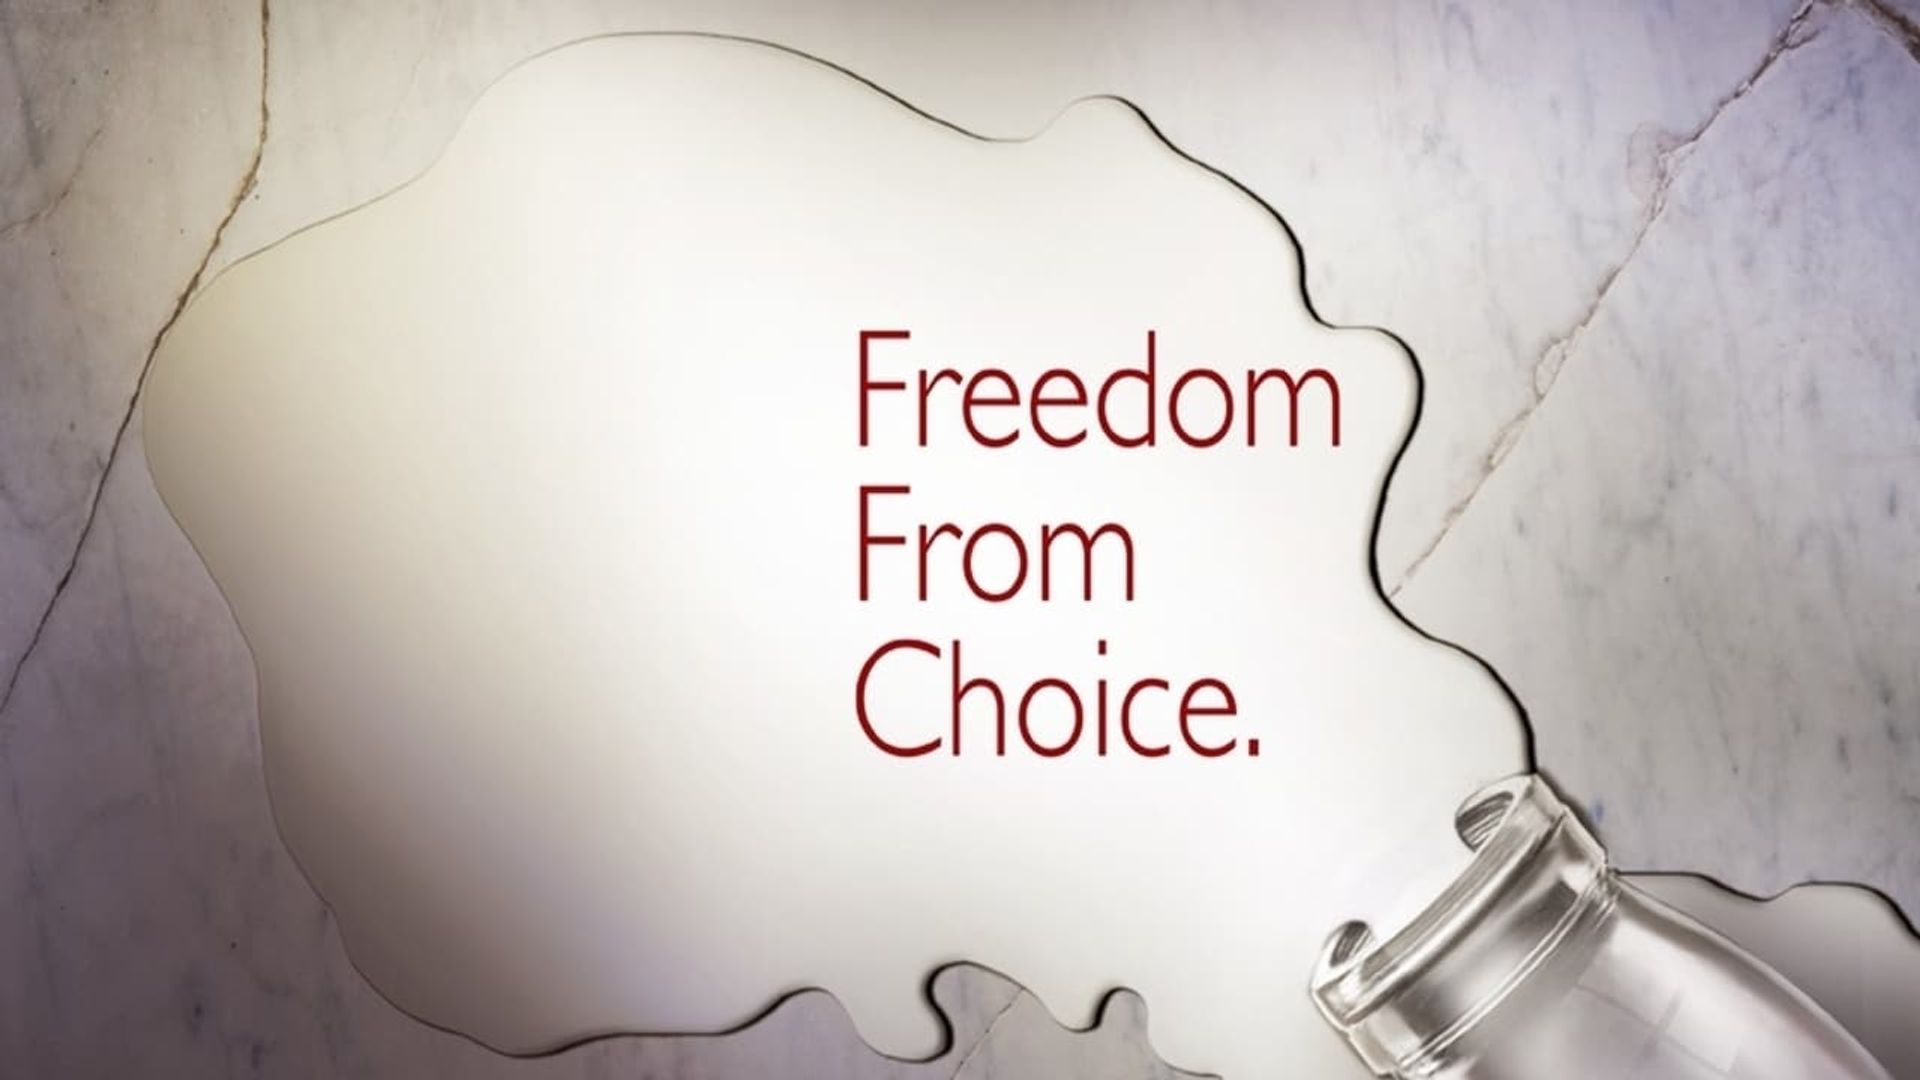 Freedom from Choice background